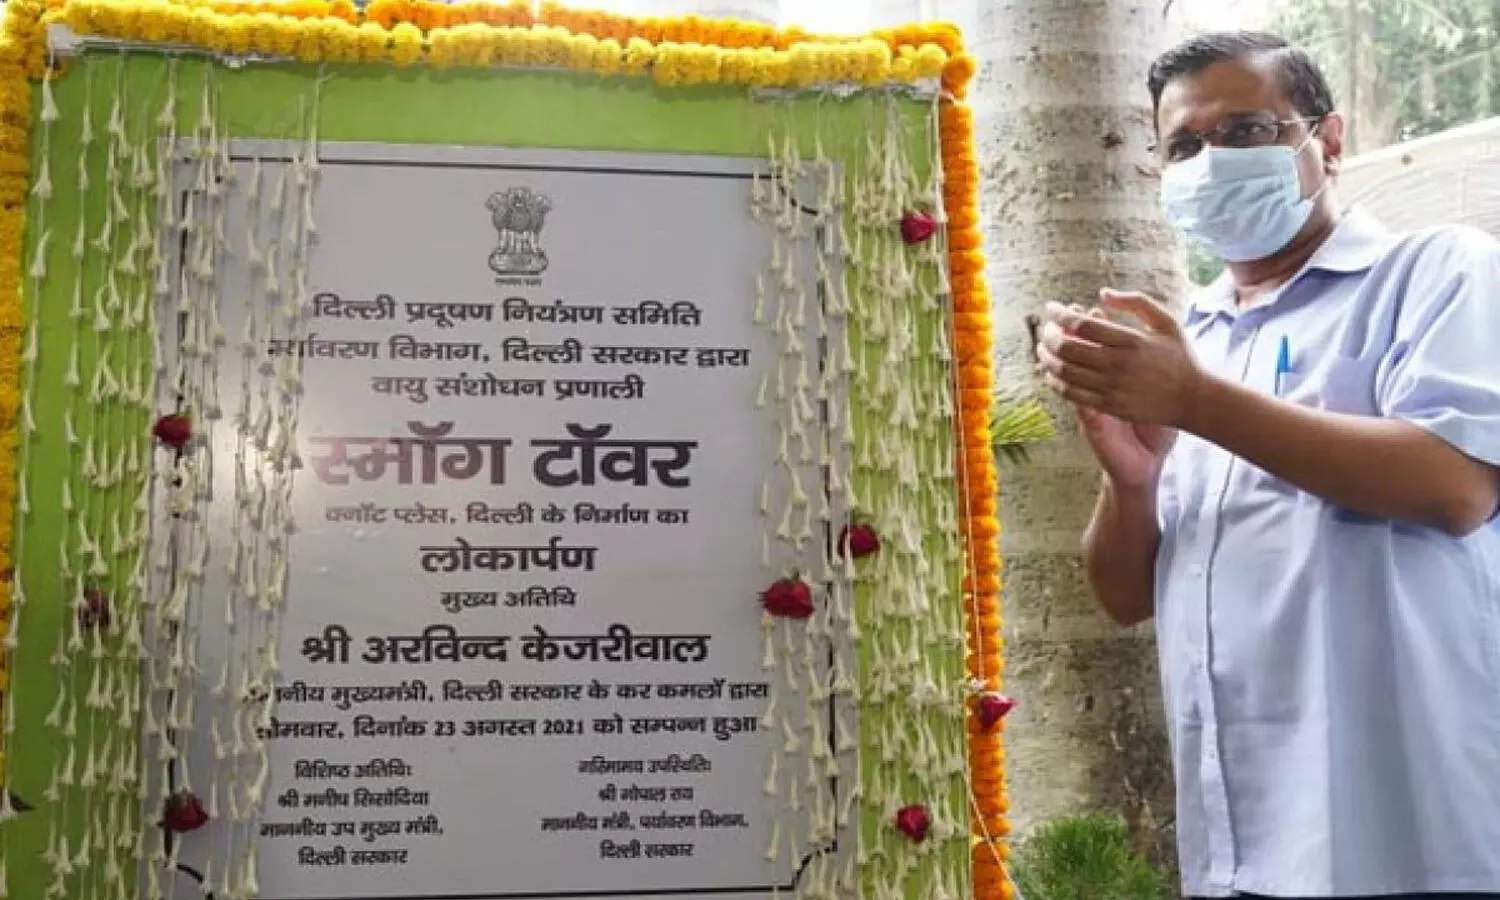 Indias first smog tower inaugurated in Delhi; Details Inside